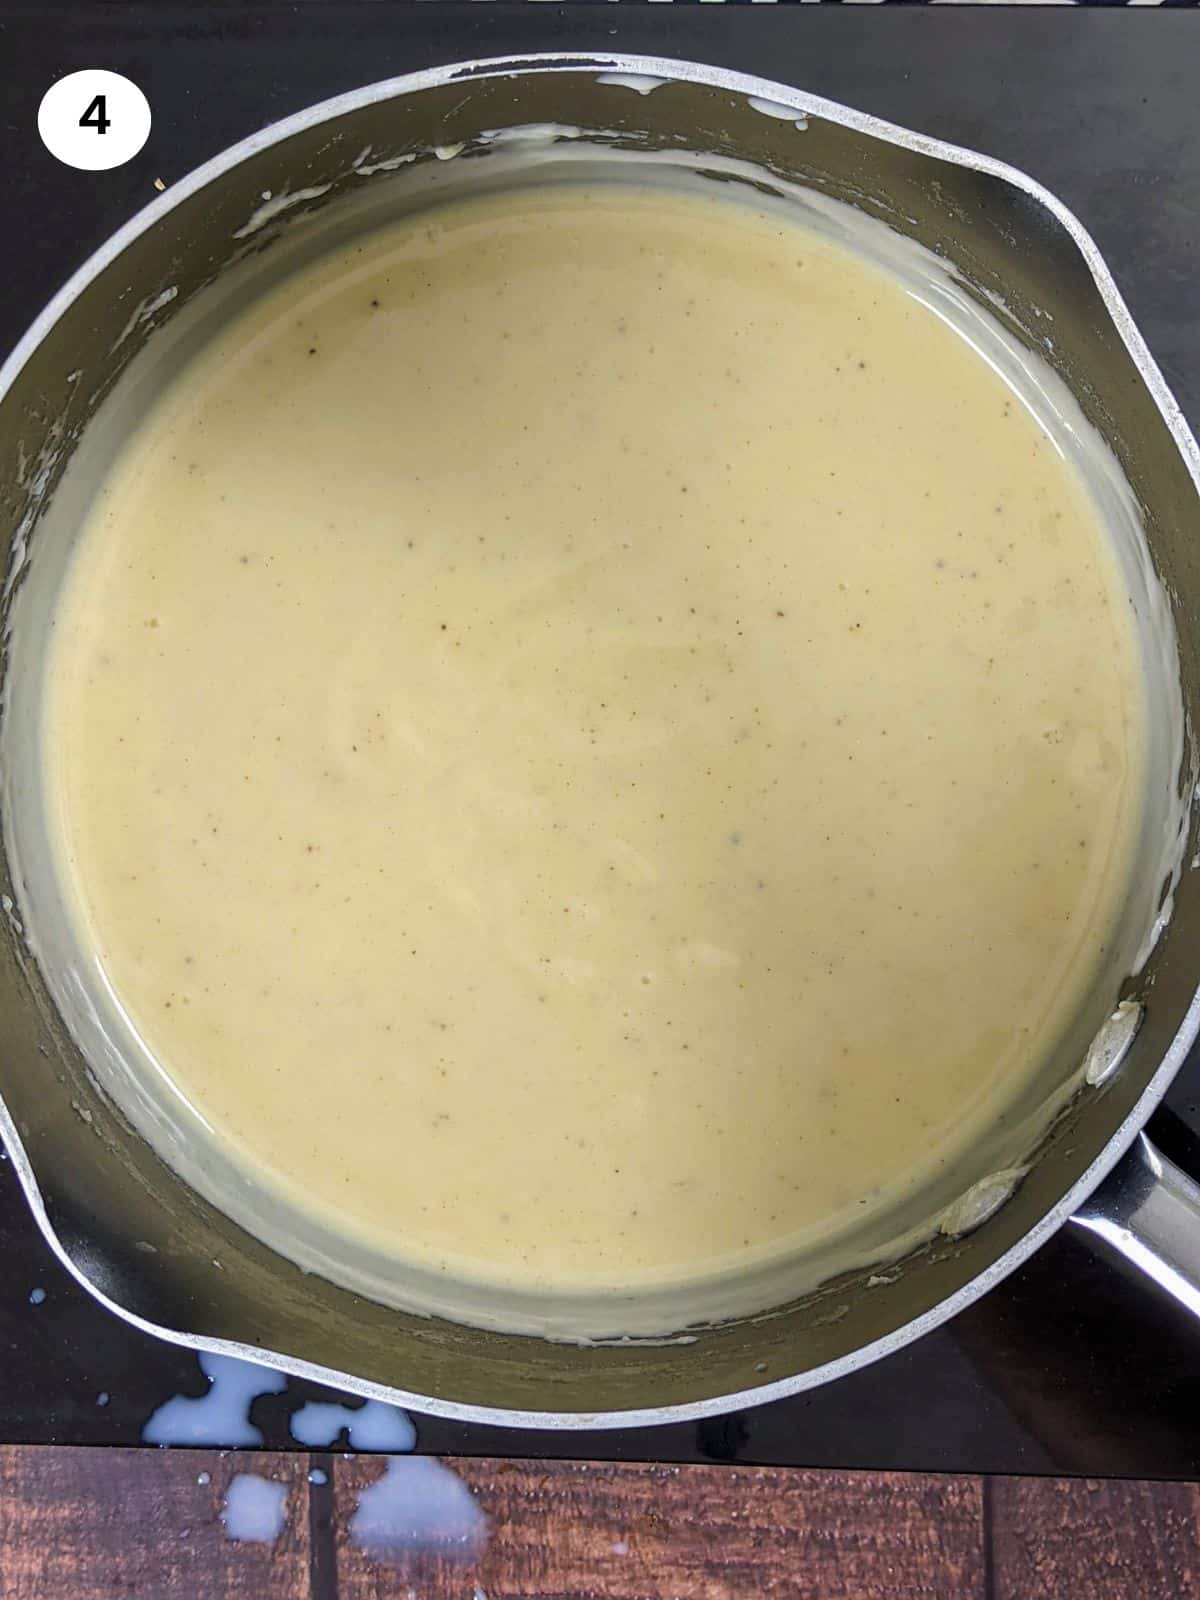 Ready bechamel sauce with spices and egg yolk incorporated.